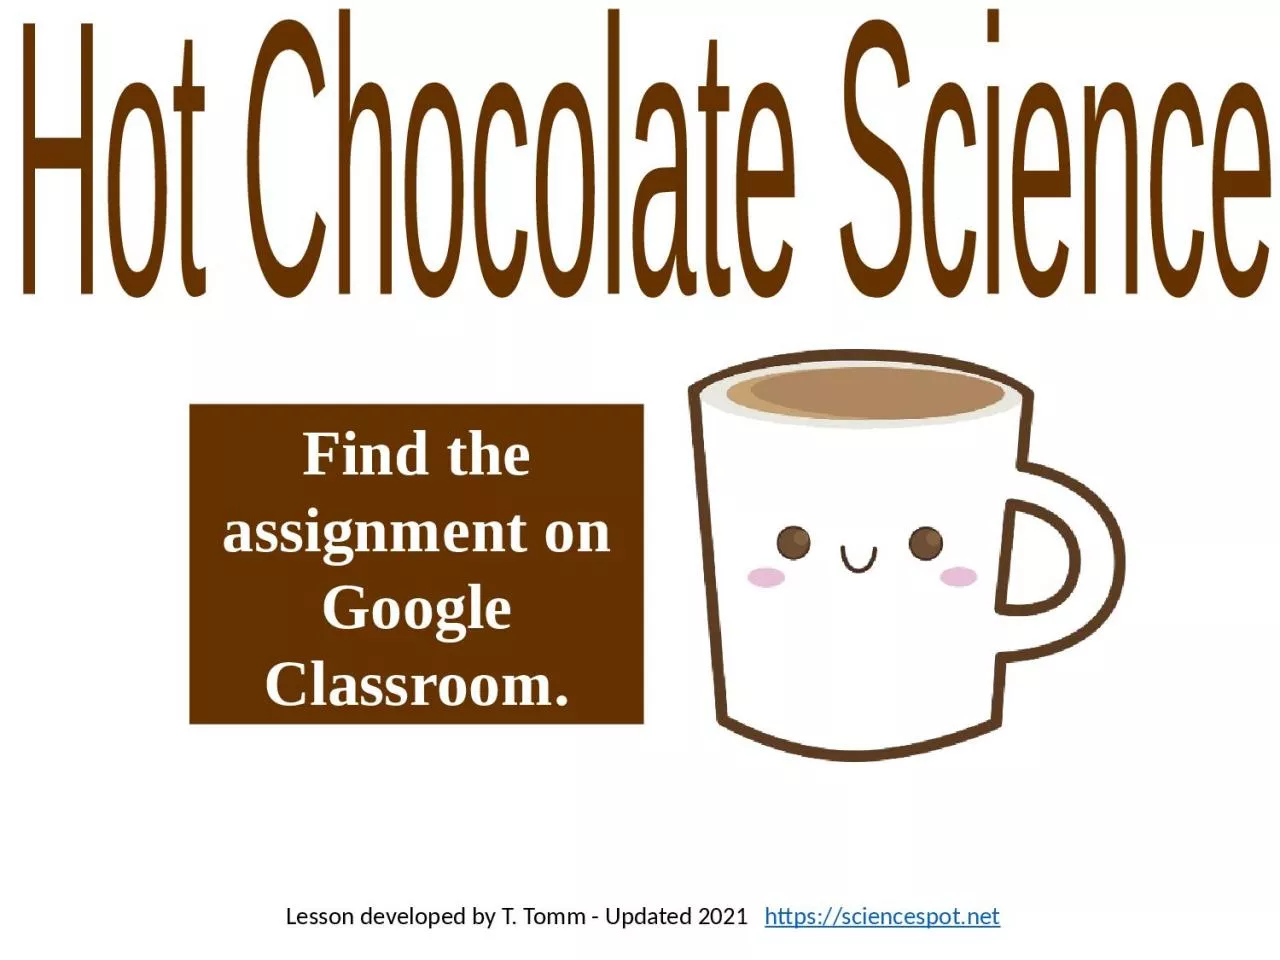 Find the assignment on Google Classroom.